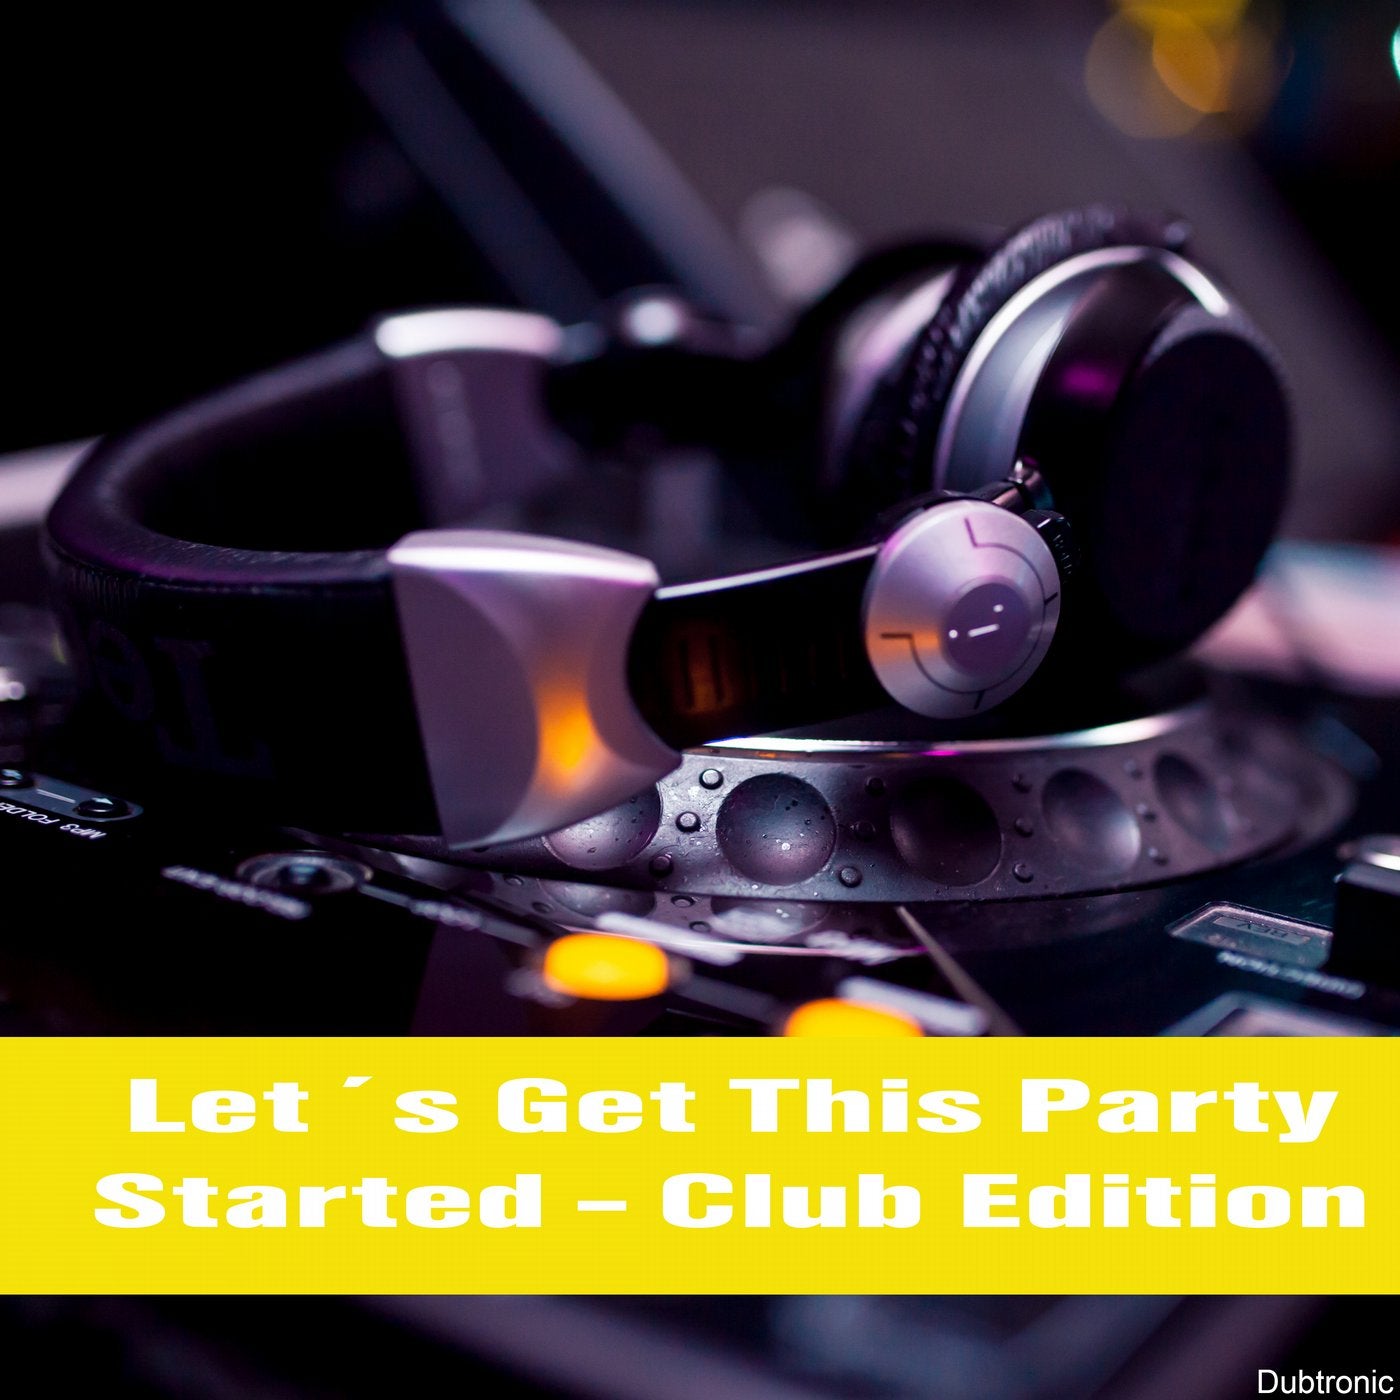 Let's Get This Party Started - Club Edition